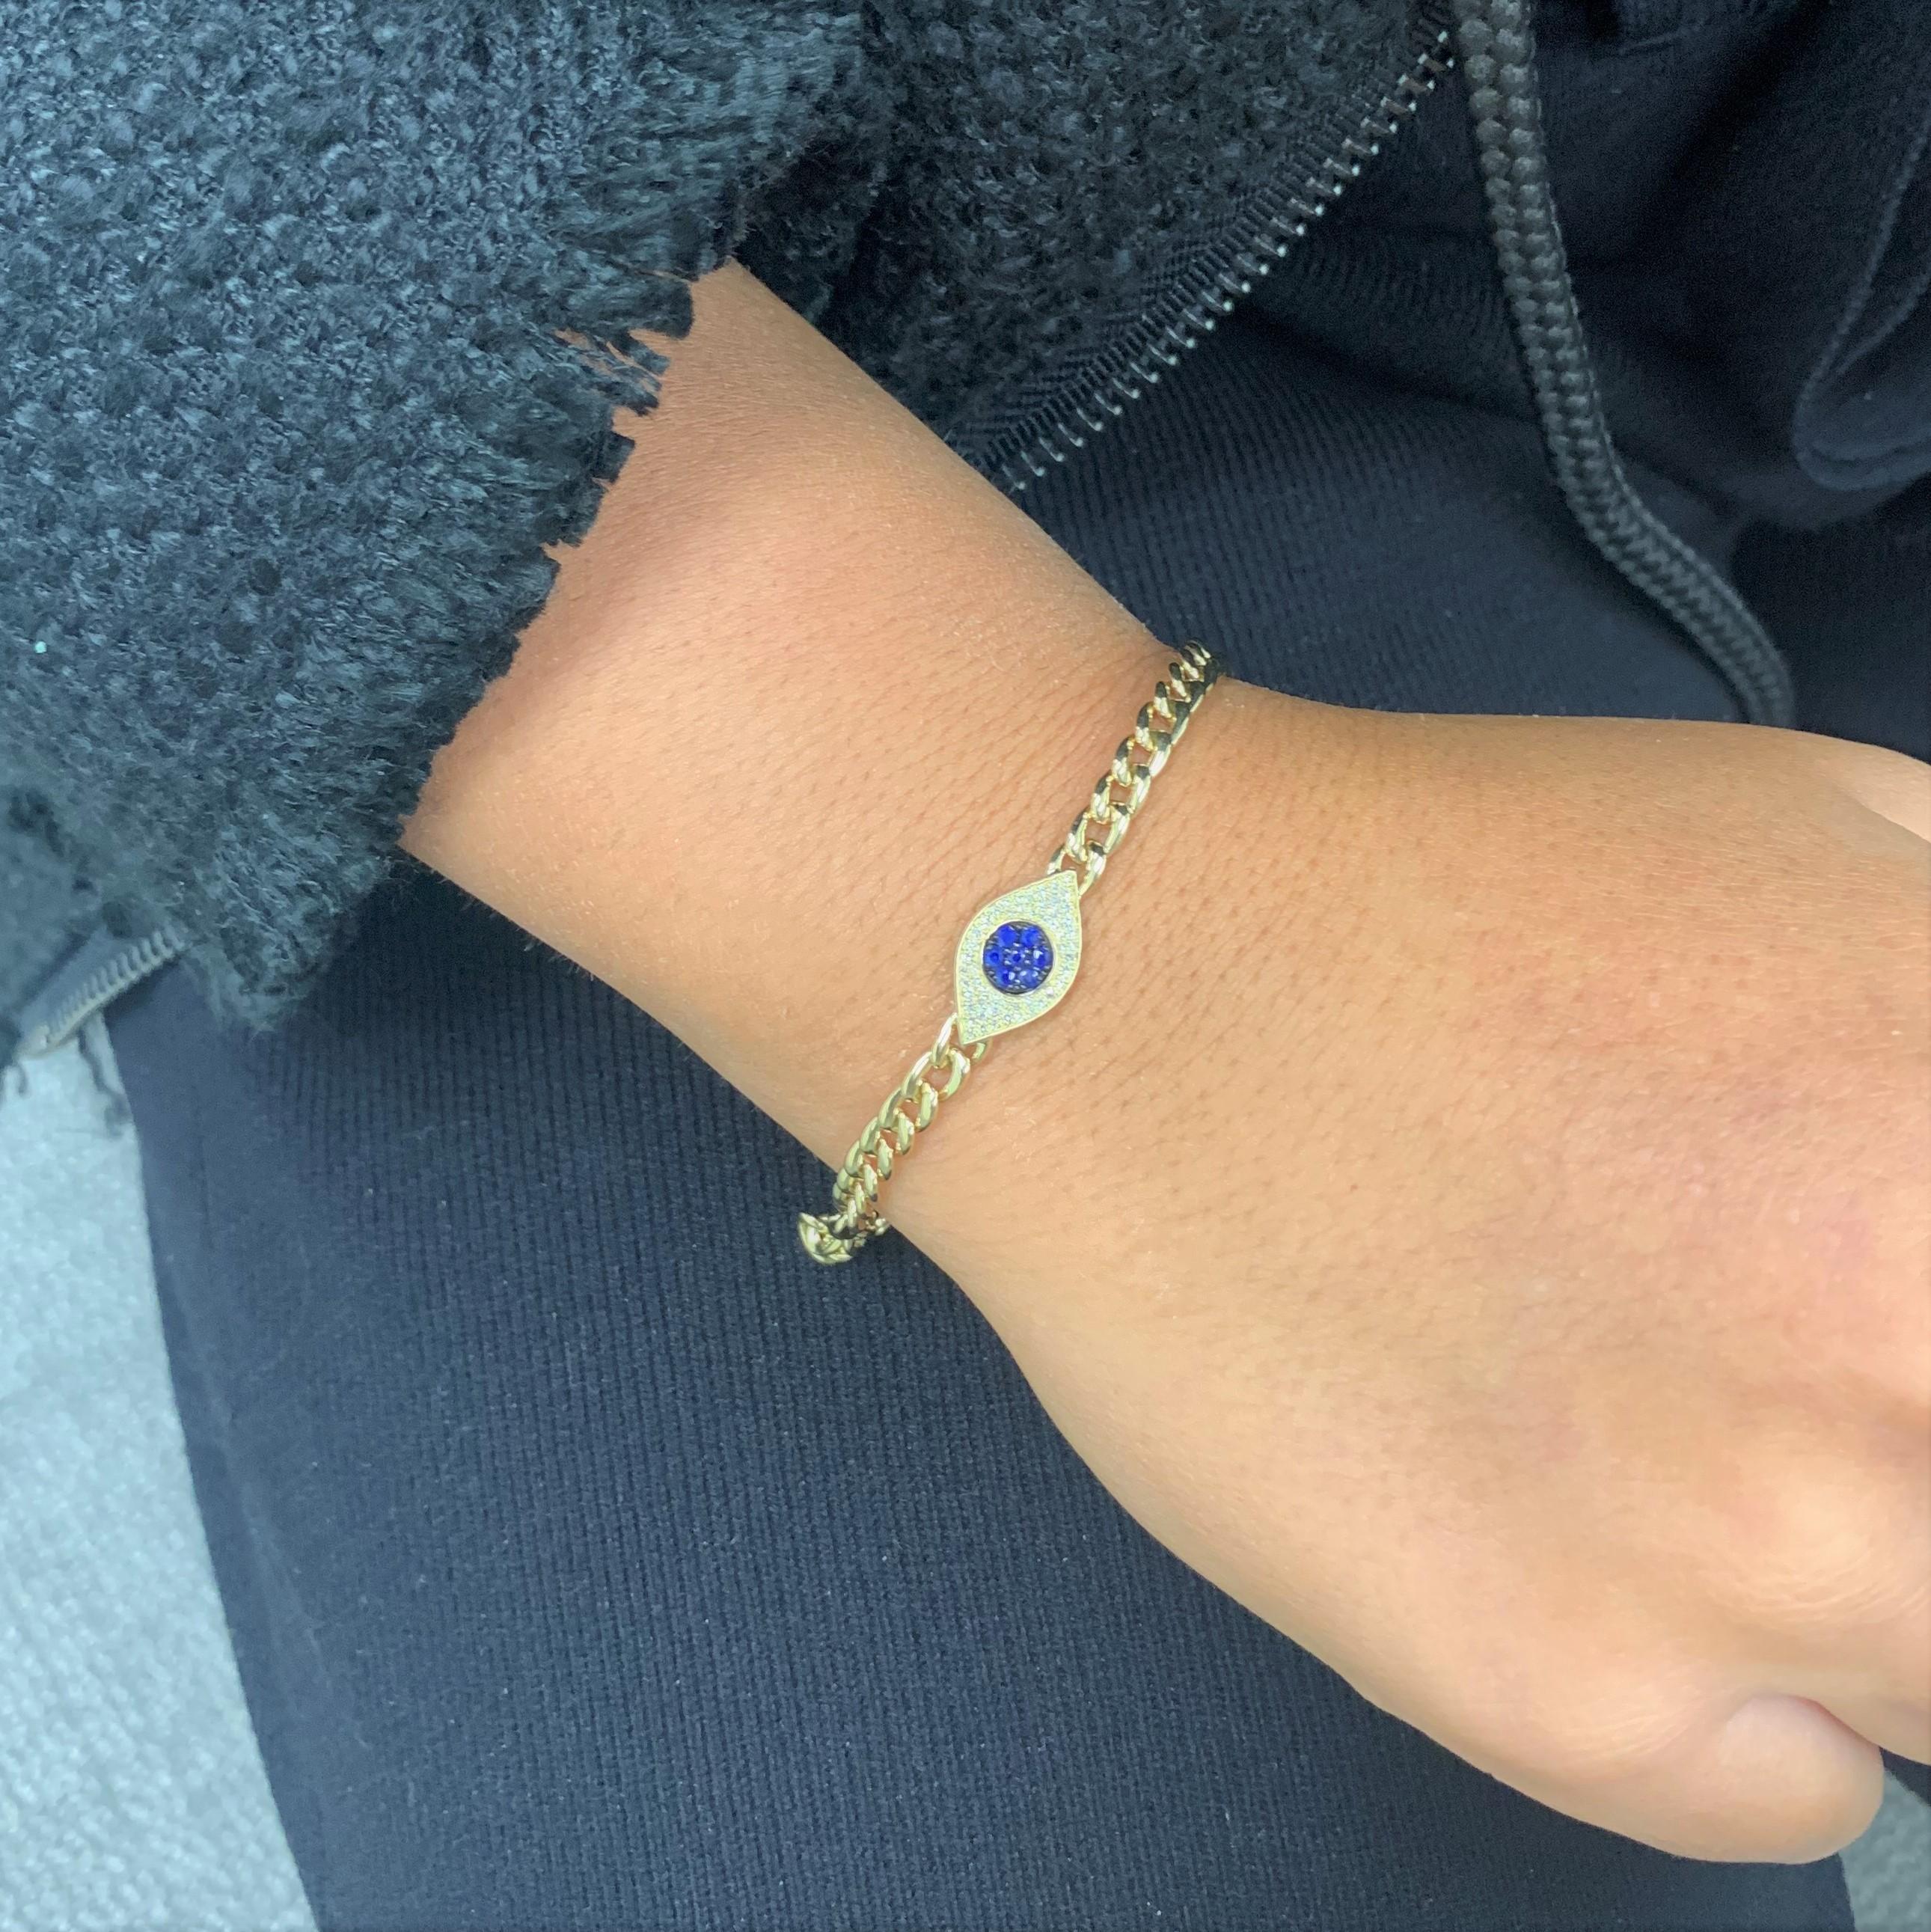 Chic and stylish, the hottest trend in jewelry fashion! Feel protected by this stunning Diamond Evil Eye bracelet featuring approximately 0.12 ct of sparkling white round diamonds and 0.17 ct of stunning blue sapphires.  
-14K Gold
-0.12 ct. Natural